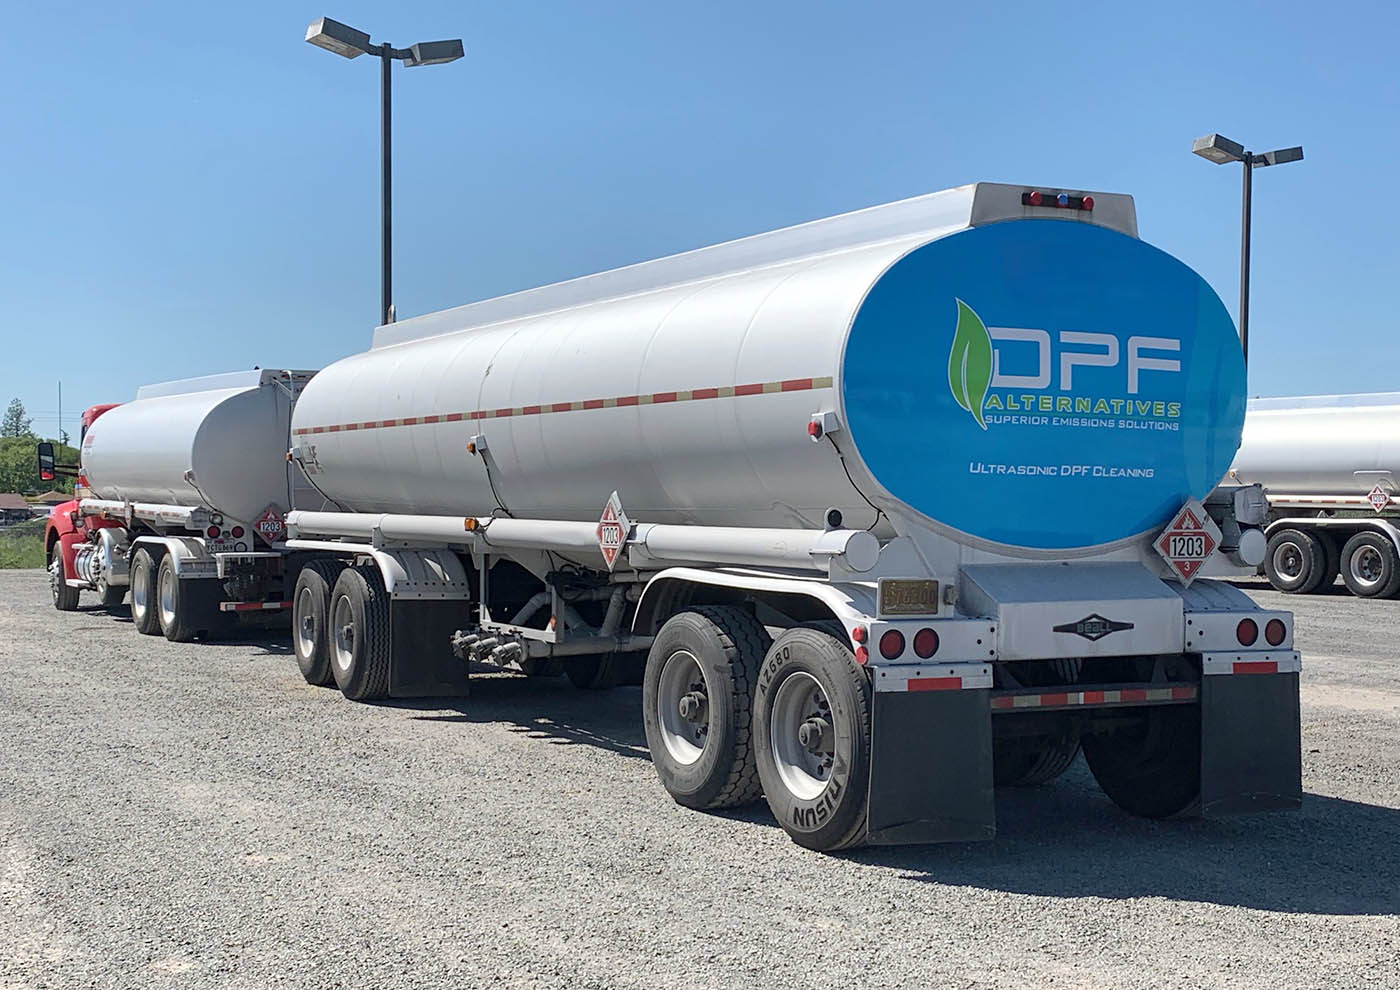 Back of a clean, large, reflective semi truck rig, contact DPF Alternatives for a DPF cleaning in Augusta.